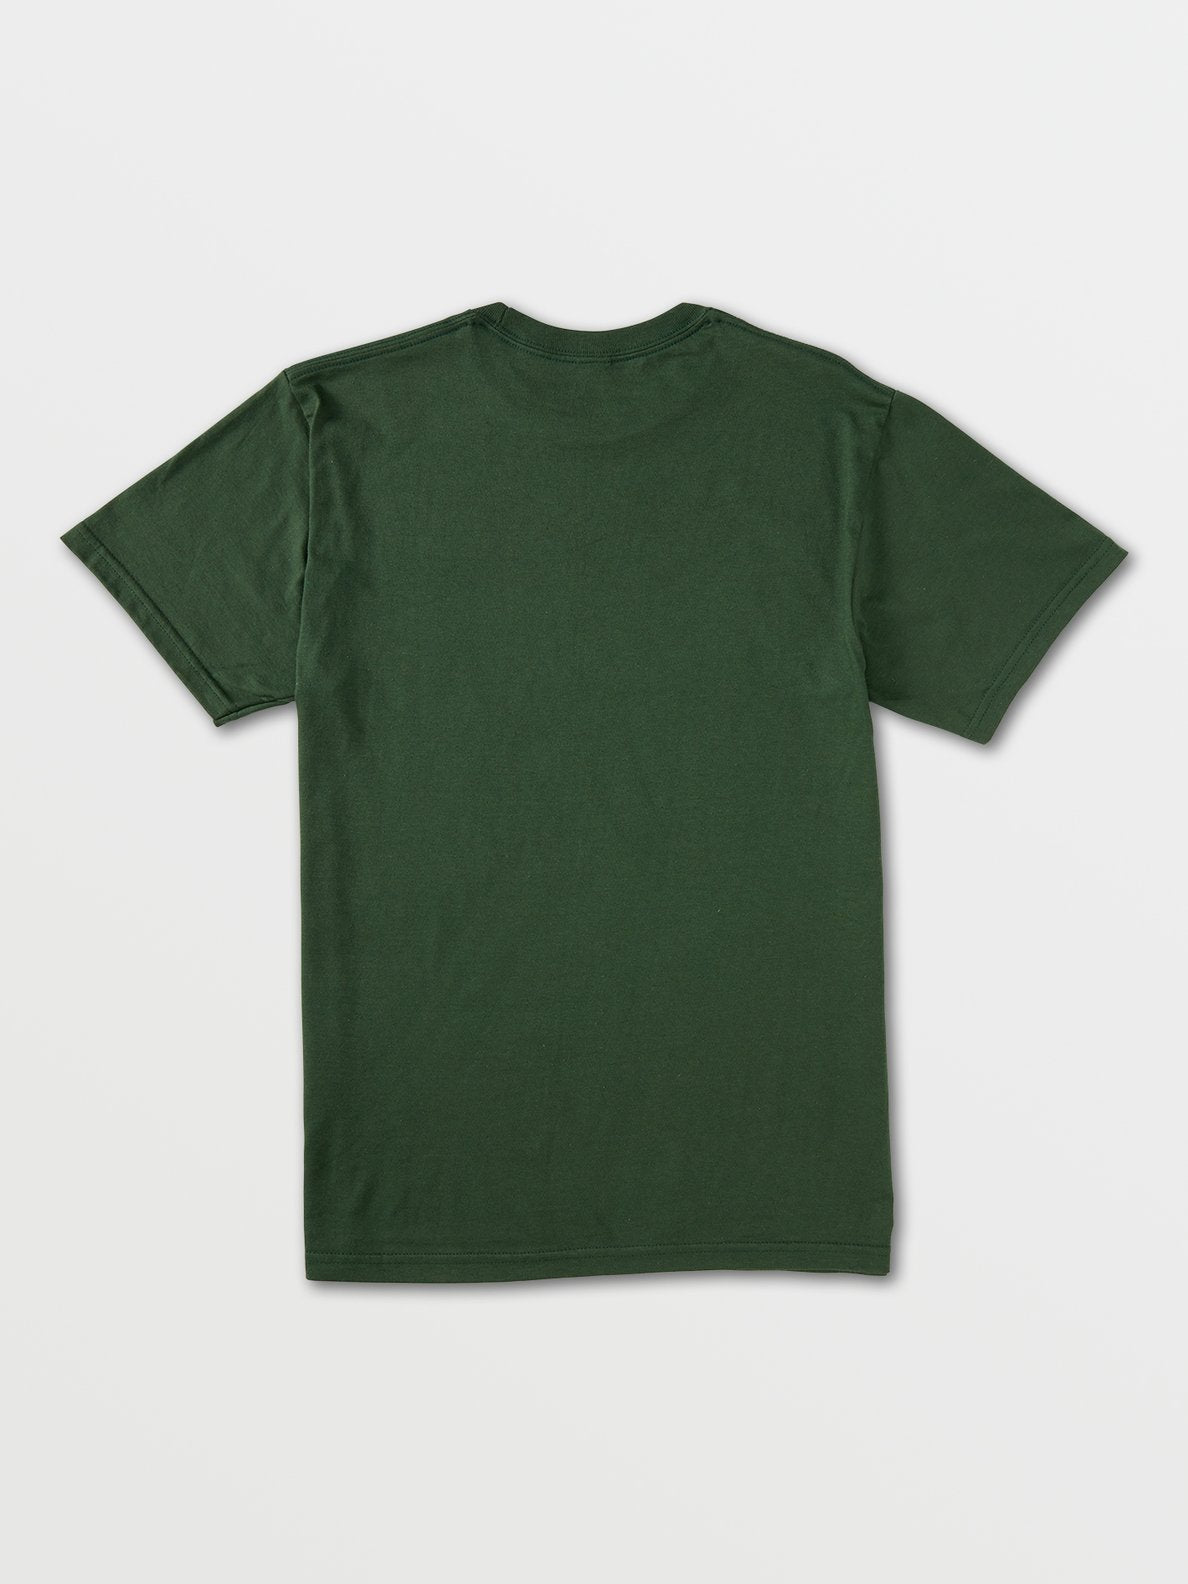 Forest Green Louie Lopez Faces Volcom T-Shirt Back